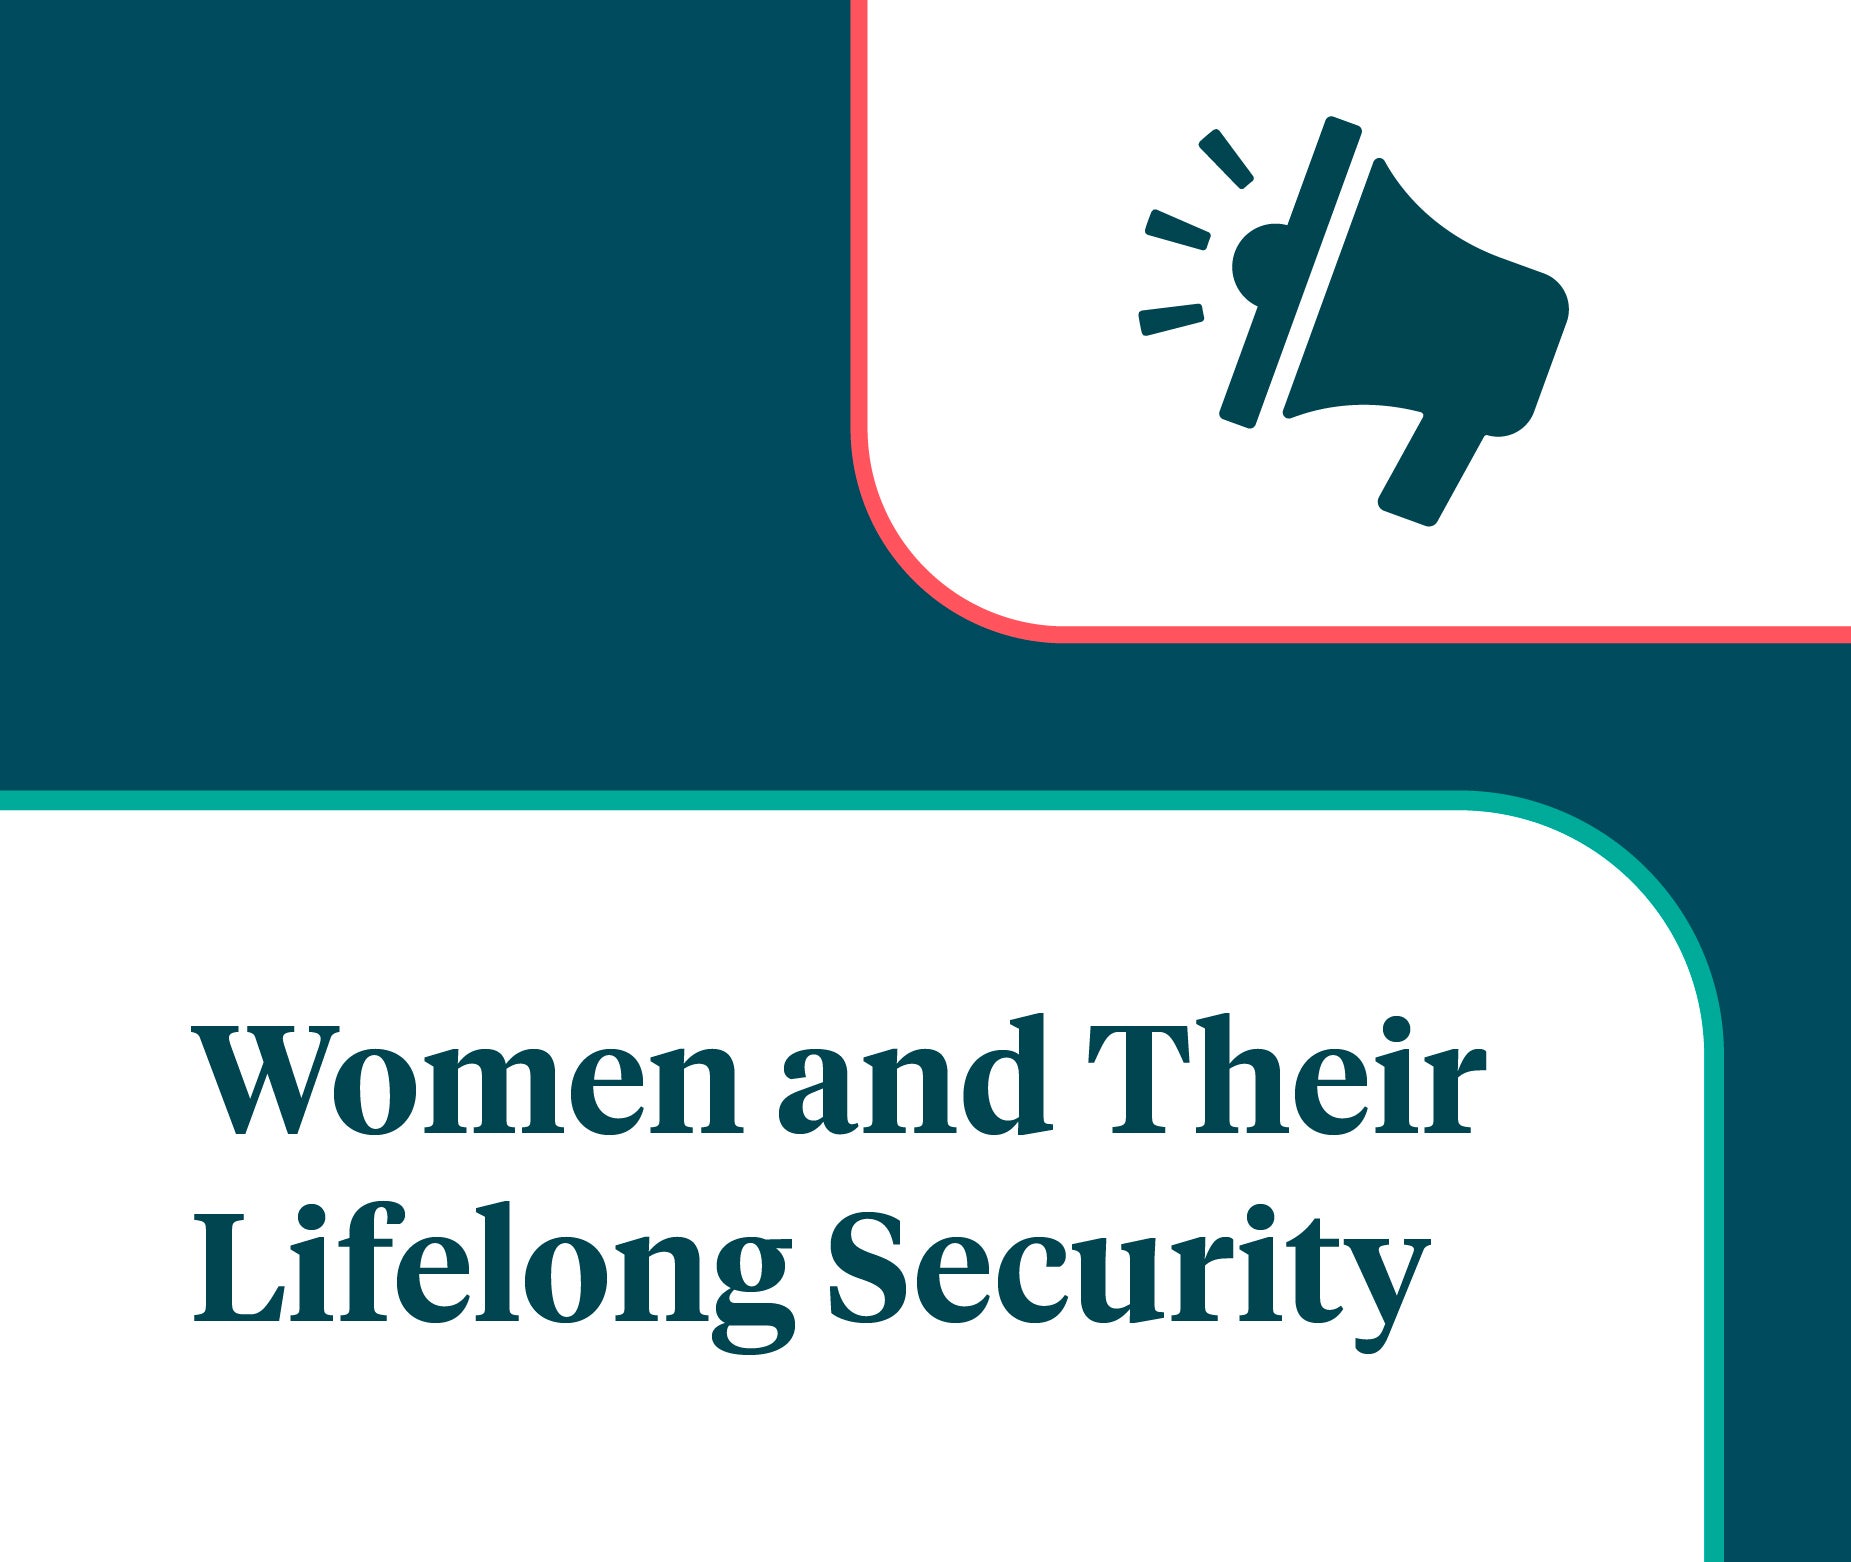 Women and Their Lifelong Security